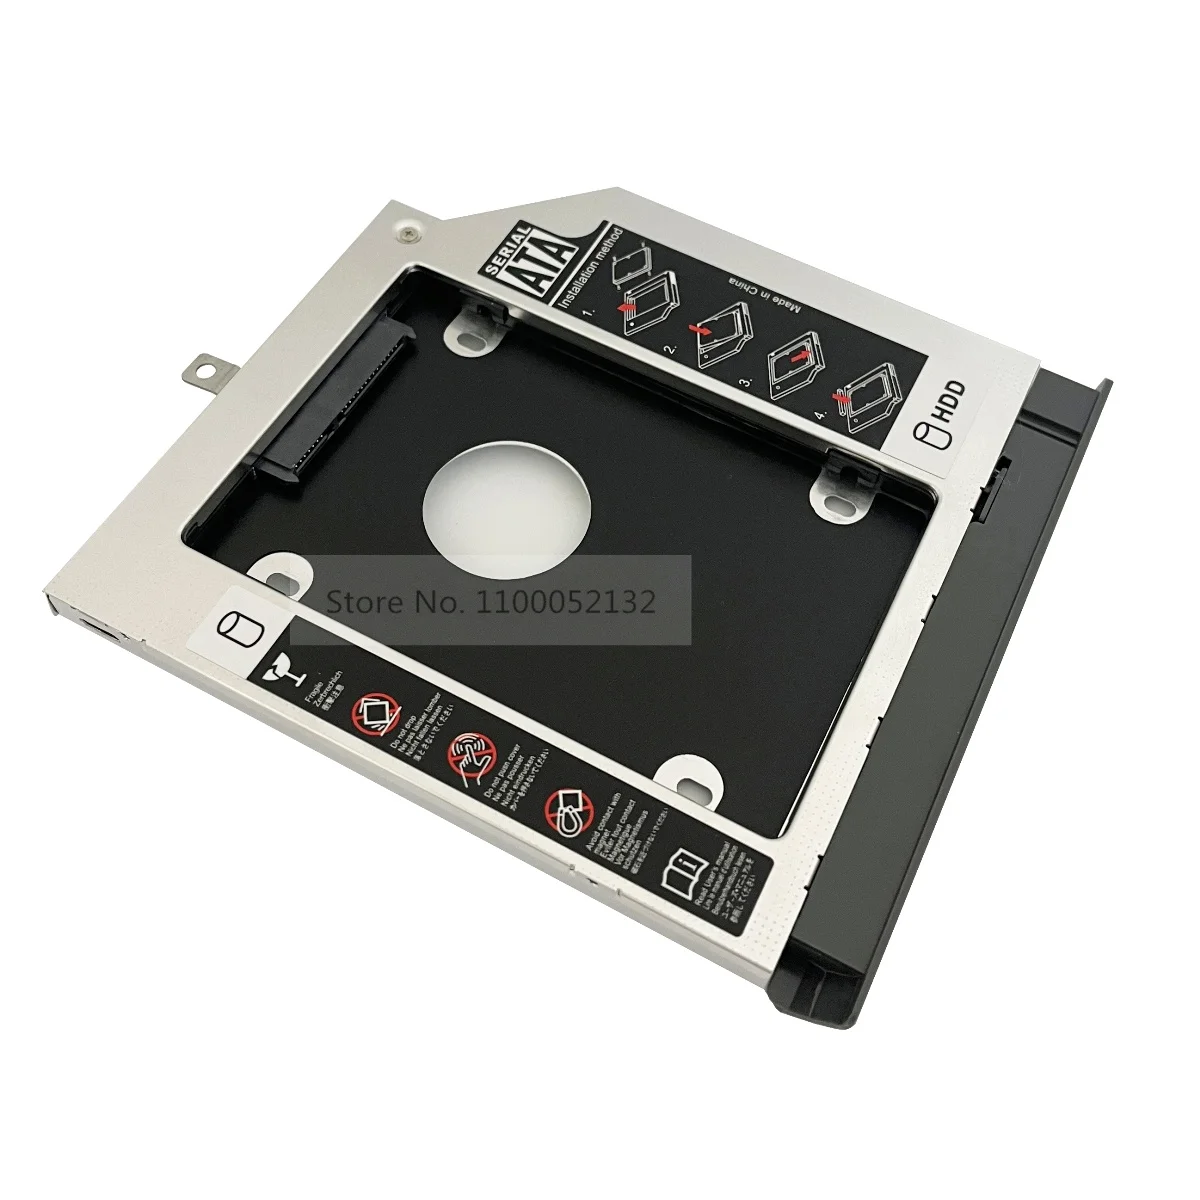 

with Faceplate Bezel 2nd SSD HDD Hard Drive Adapter Optical bay Caddy Frame Bracket for Lenovo IdeaPad 320 330 520 Series